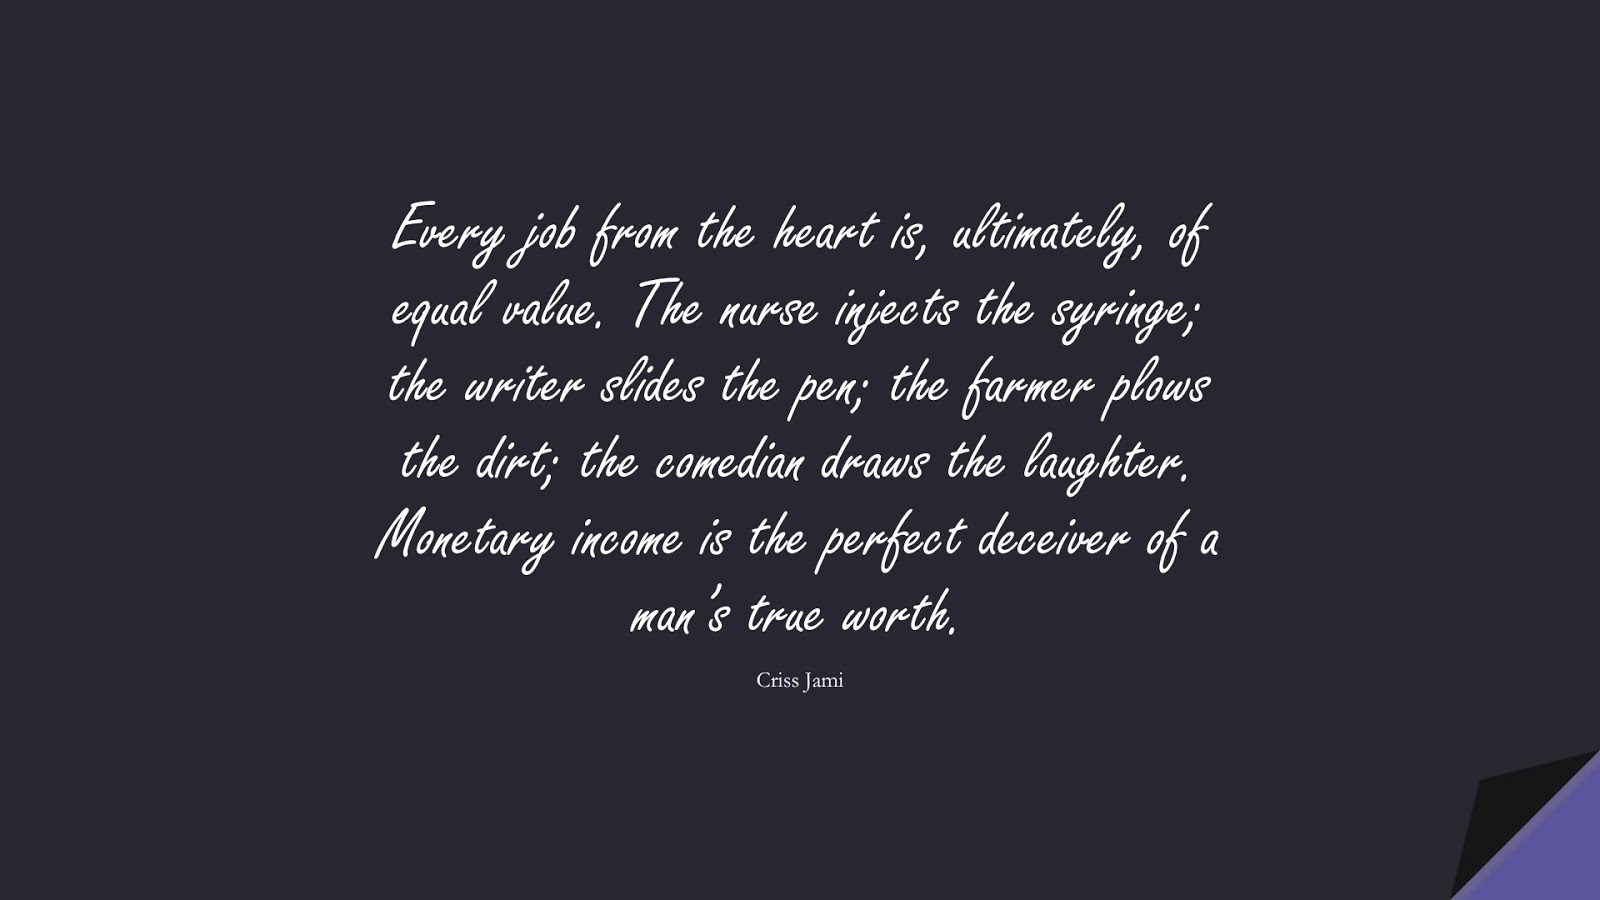 Every job from the heart is, ultimately, of equal value. The nurse injects the syringe; the writer slides the pen; the farmer plows the dirt; the comedian draws the laughter. Monetary income is the perfect deceiver of a man’s true worth. (Criss Jami);  #MoneyQuotes